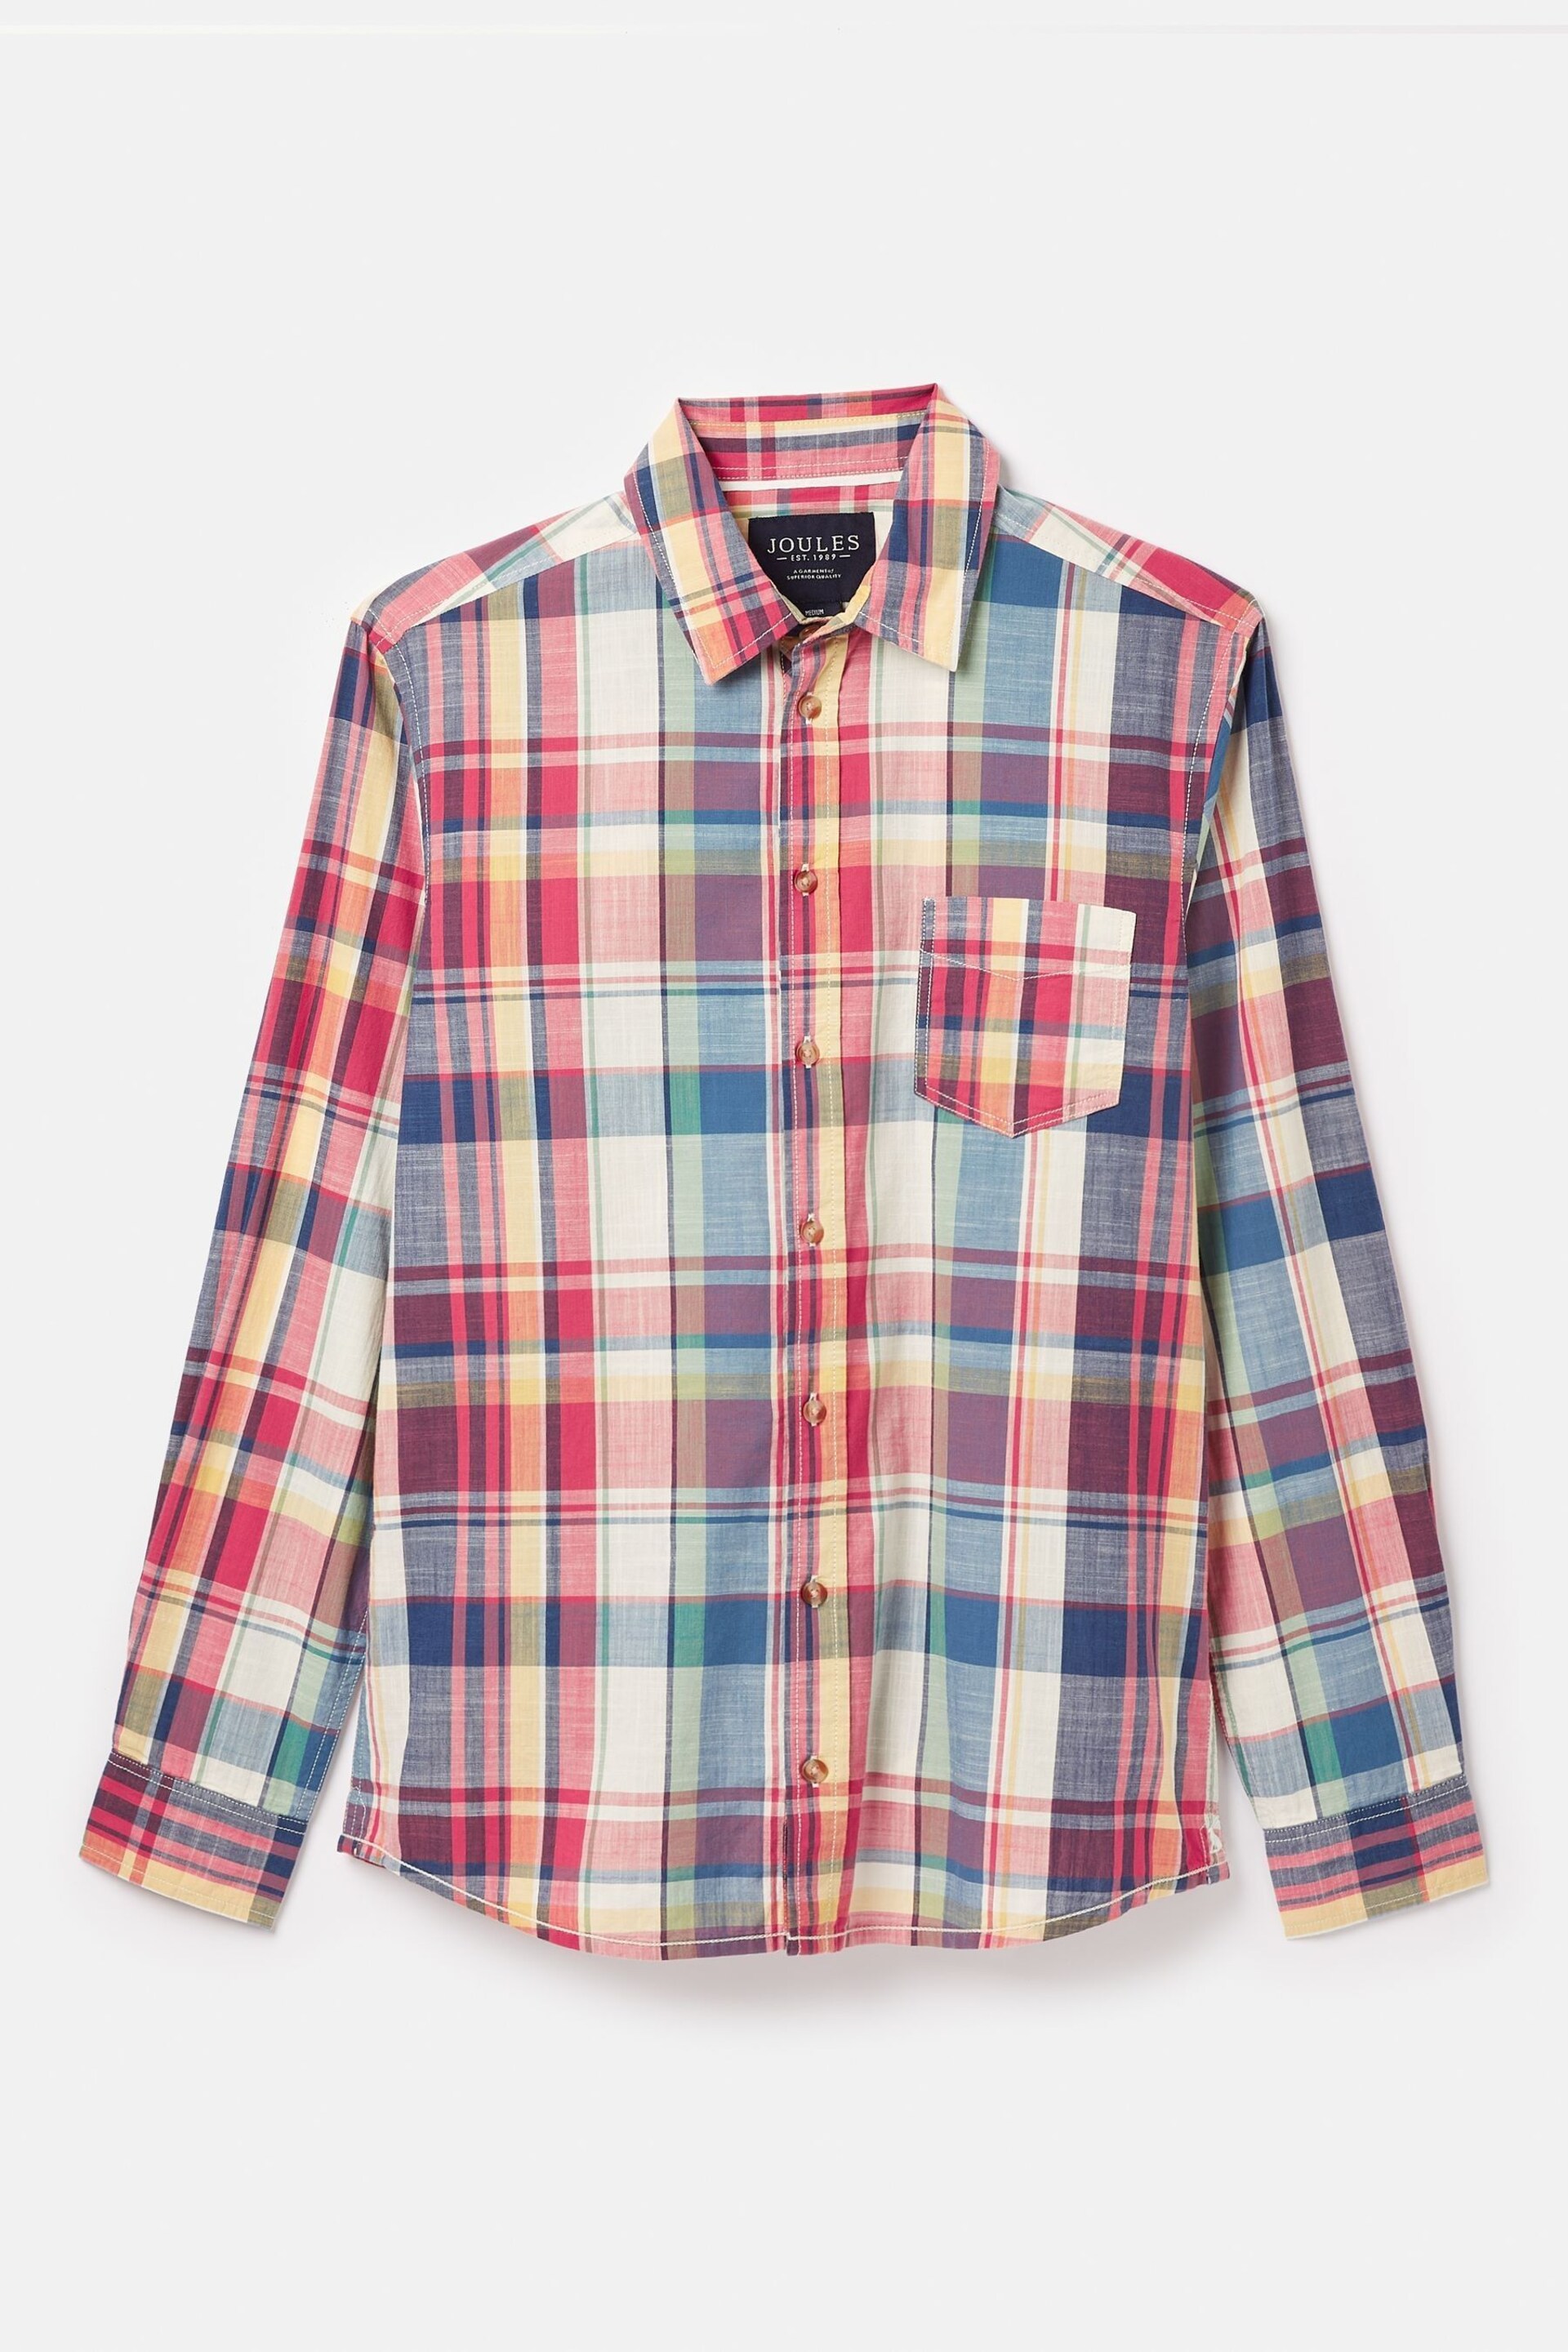 Joules Madras Blue/Pink Long Sleeve Cotton Check Shirt - Image 7 of 7